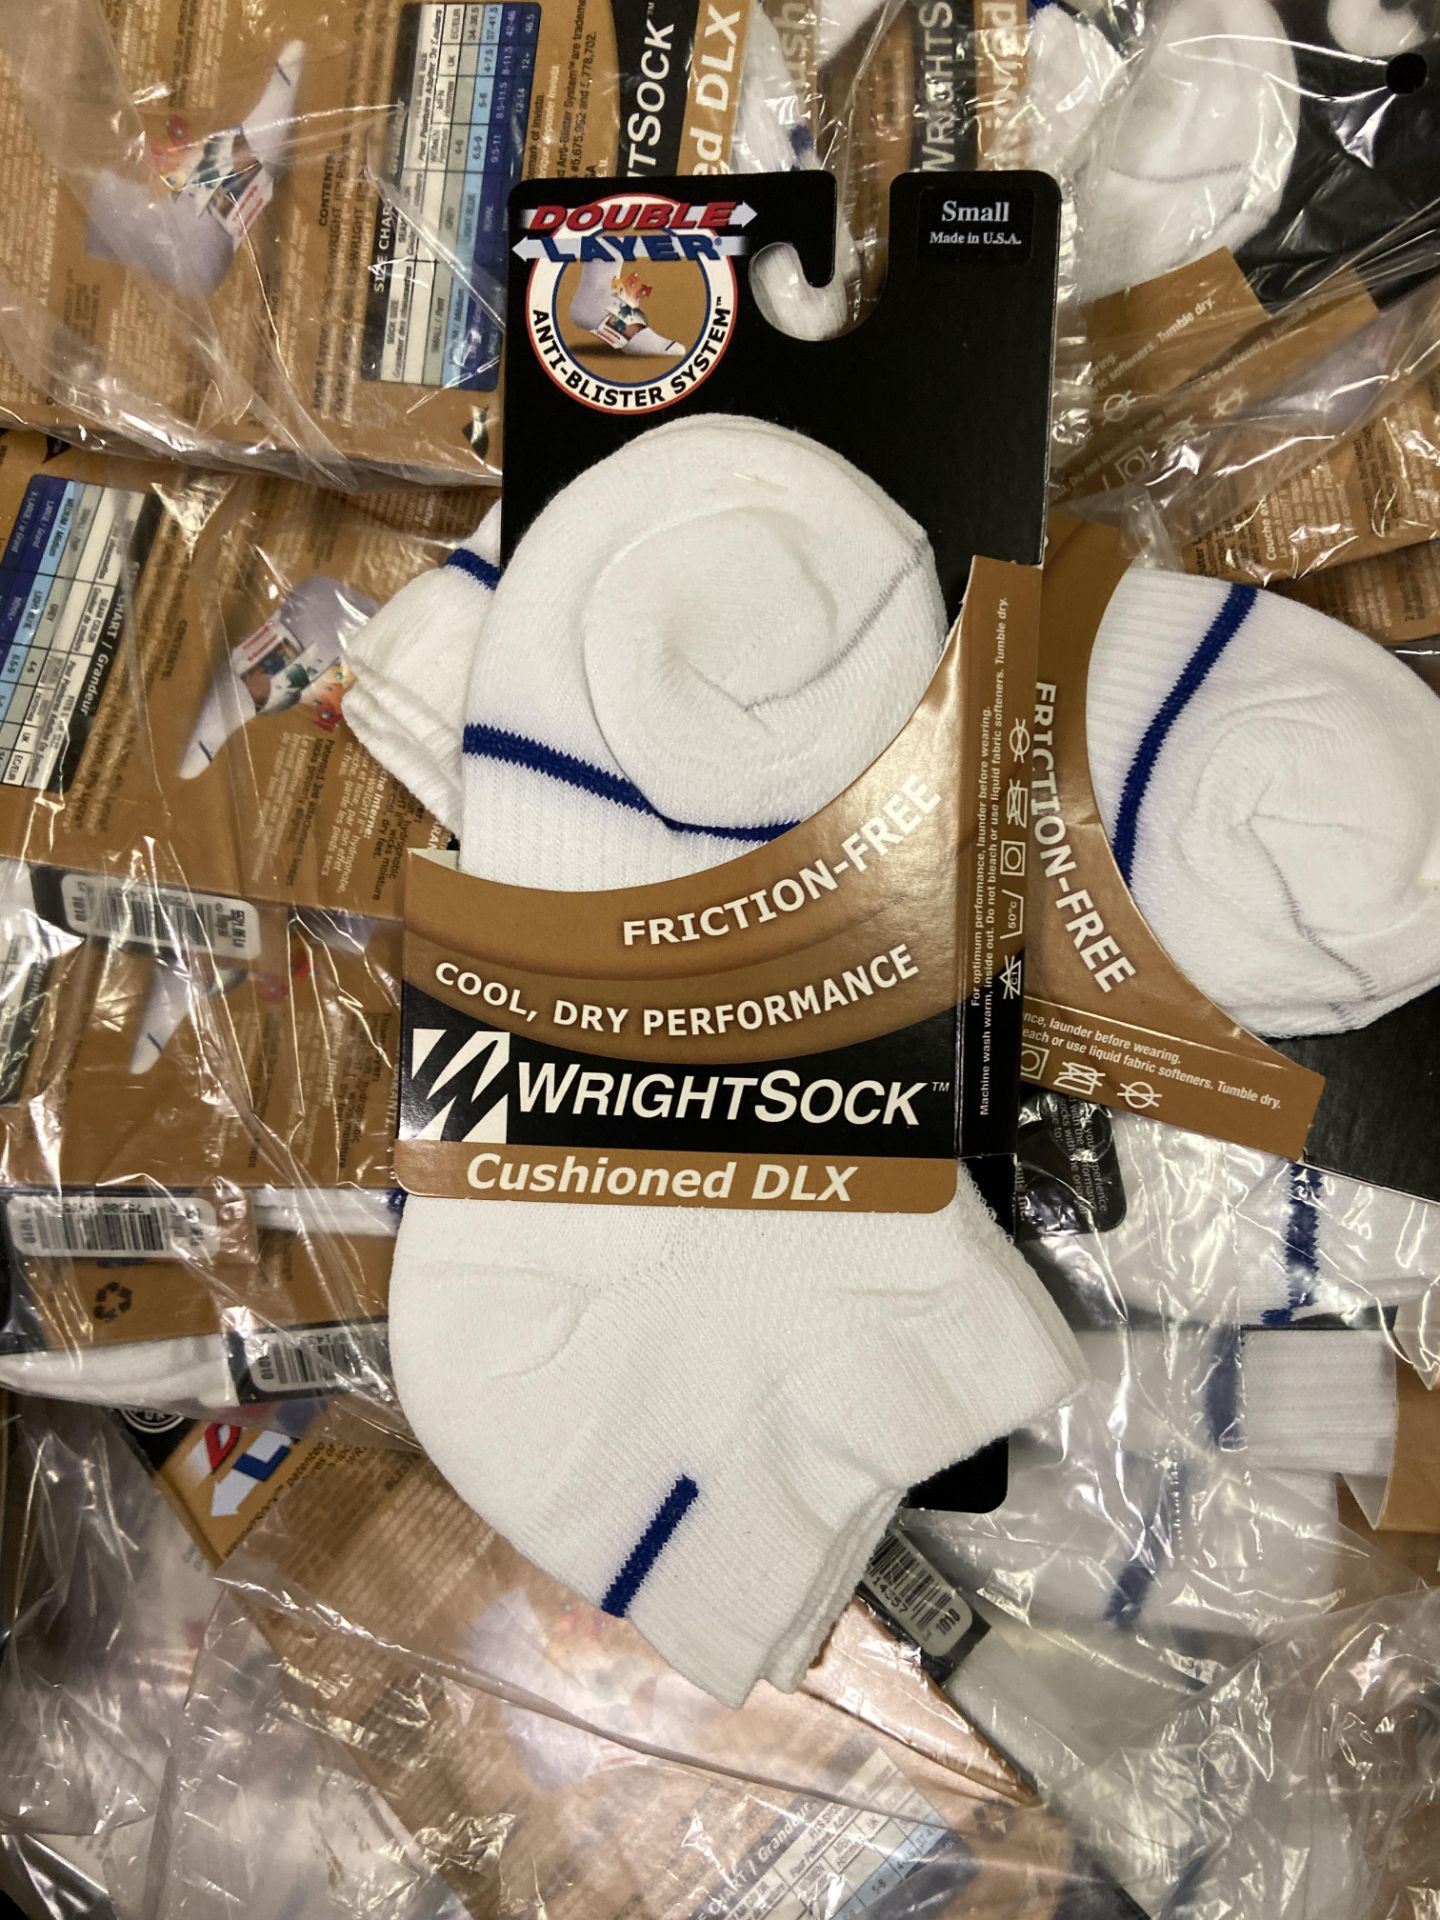 500+ packs of New Socks, Wrightsock Coolmesh & Cushioned DLX, Double Layer, White Gray/Blue Stripe - Image 5 of 6